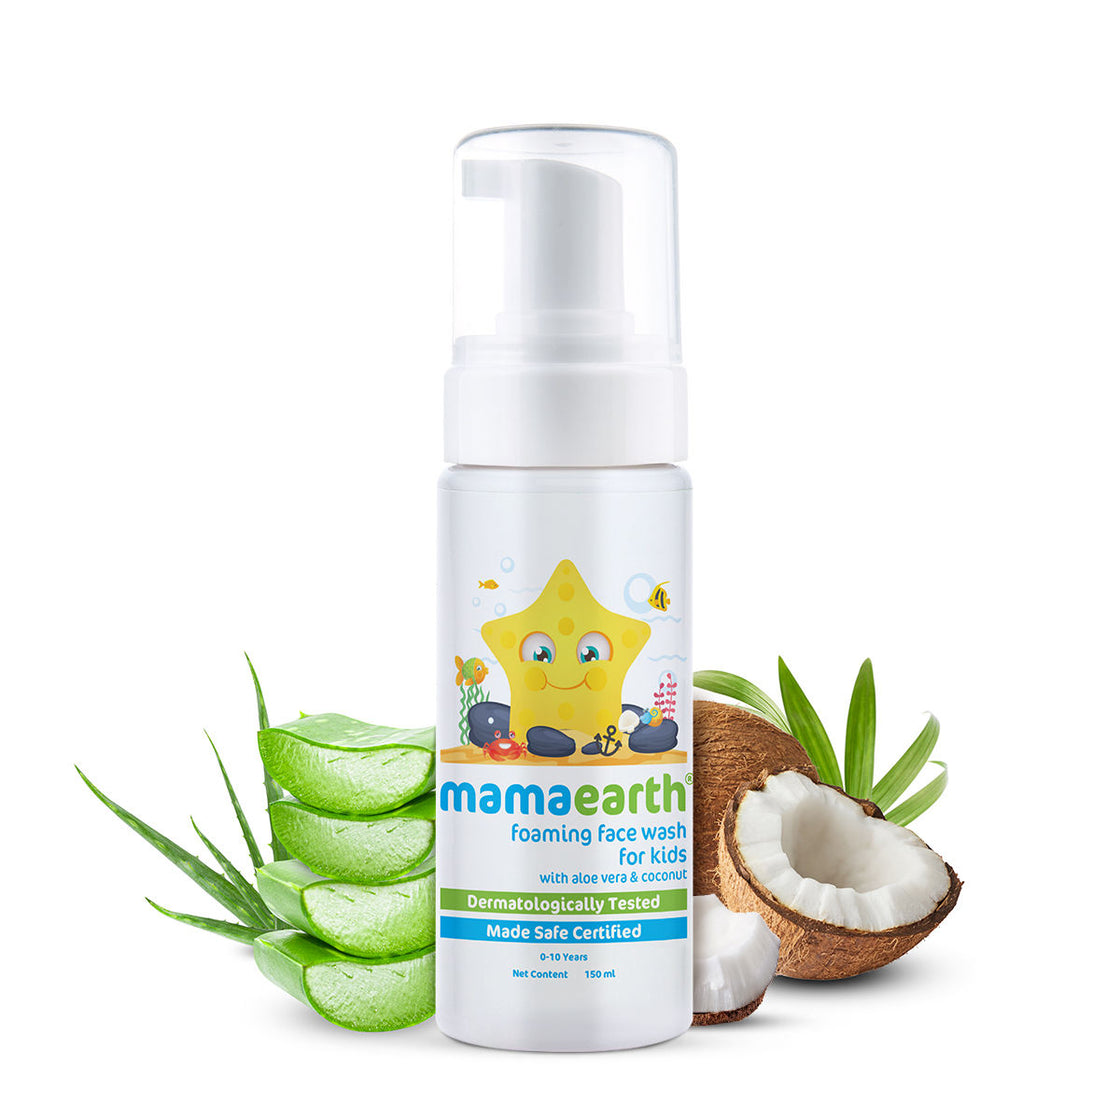 Mamaearth Foaming Face Wash For Kids With Aloe Vera & Coconut For Gentle Cleansing